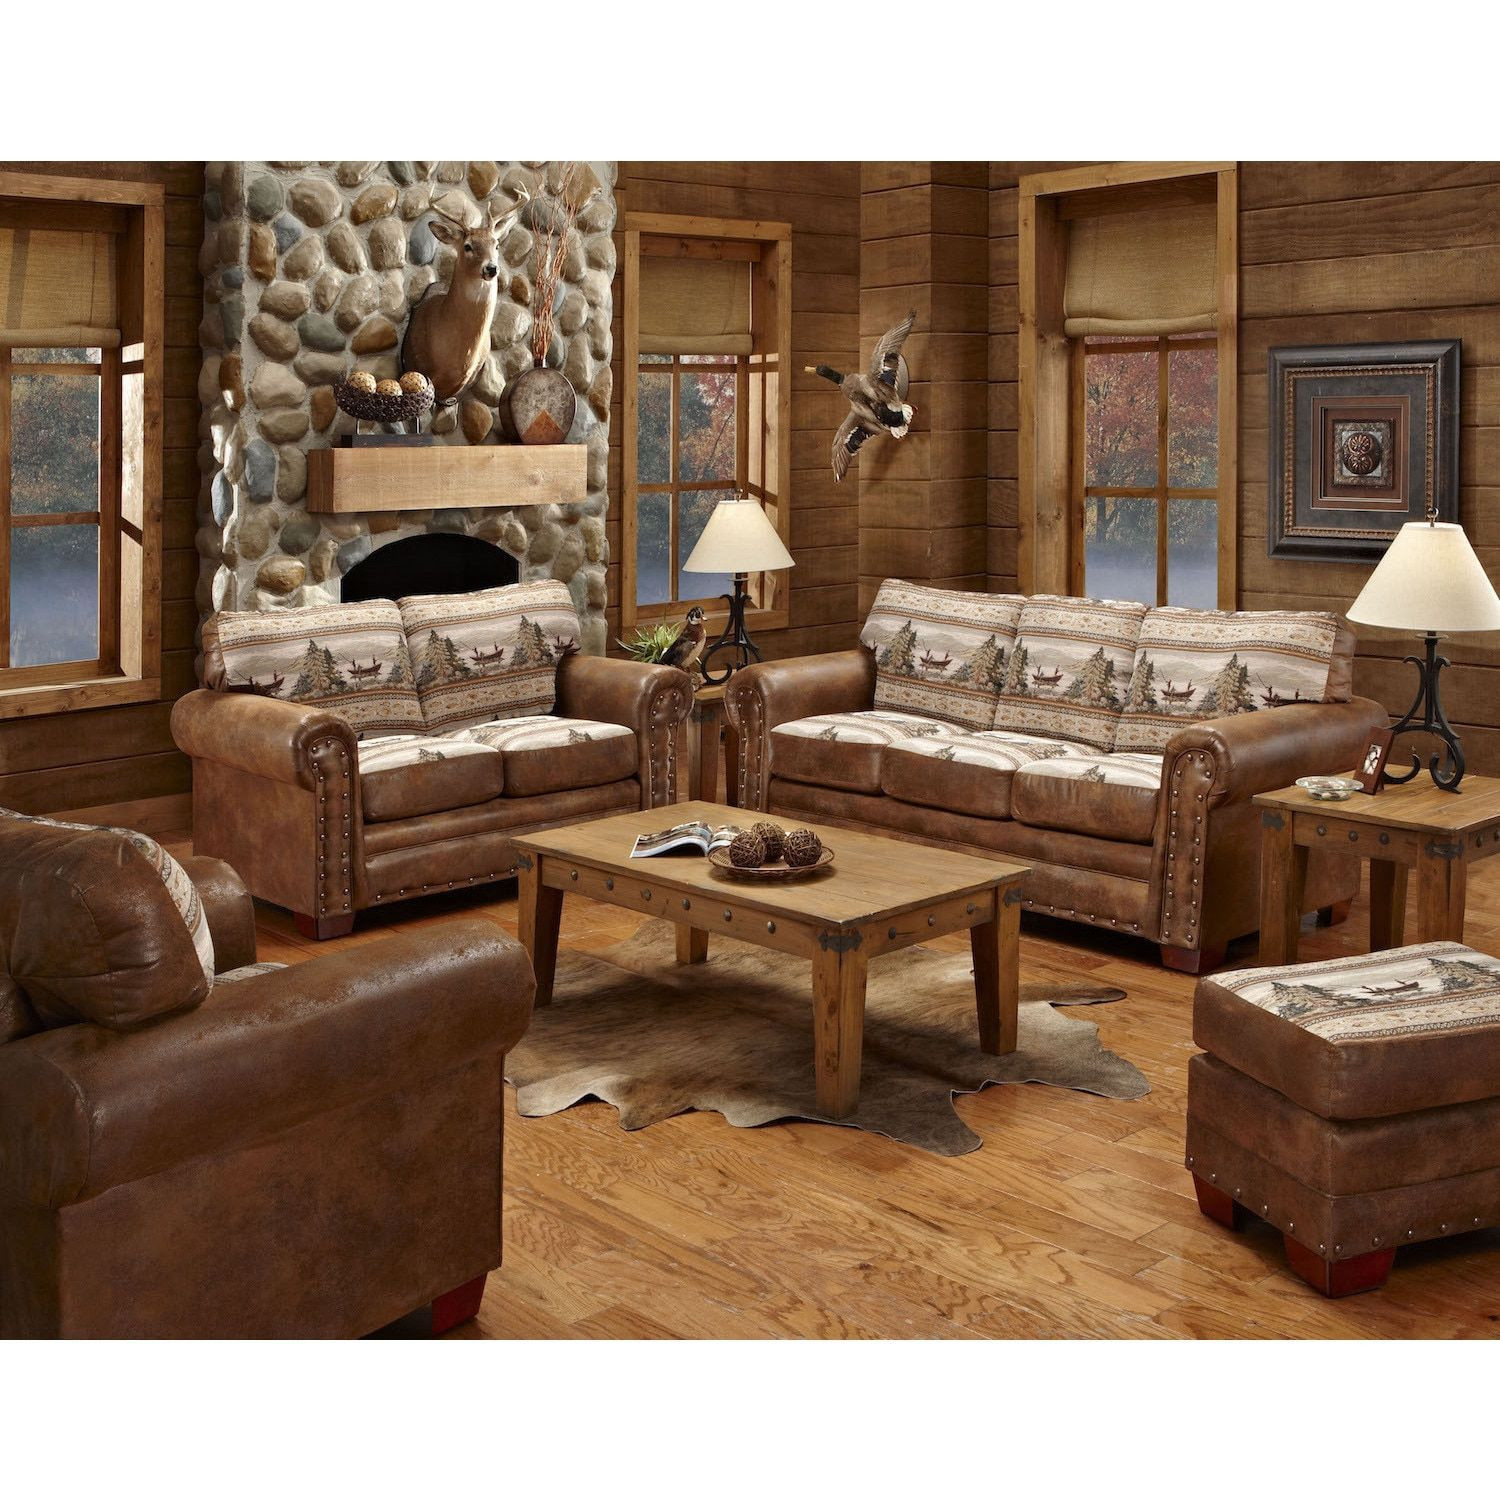 Rustic Living Room Sets Luxury Overstock Line Shopping Bedding Furniture Of Rustic Living Room Sets 